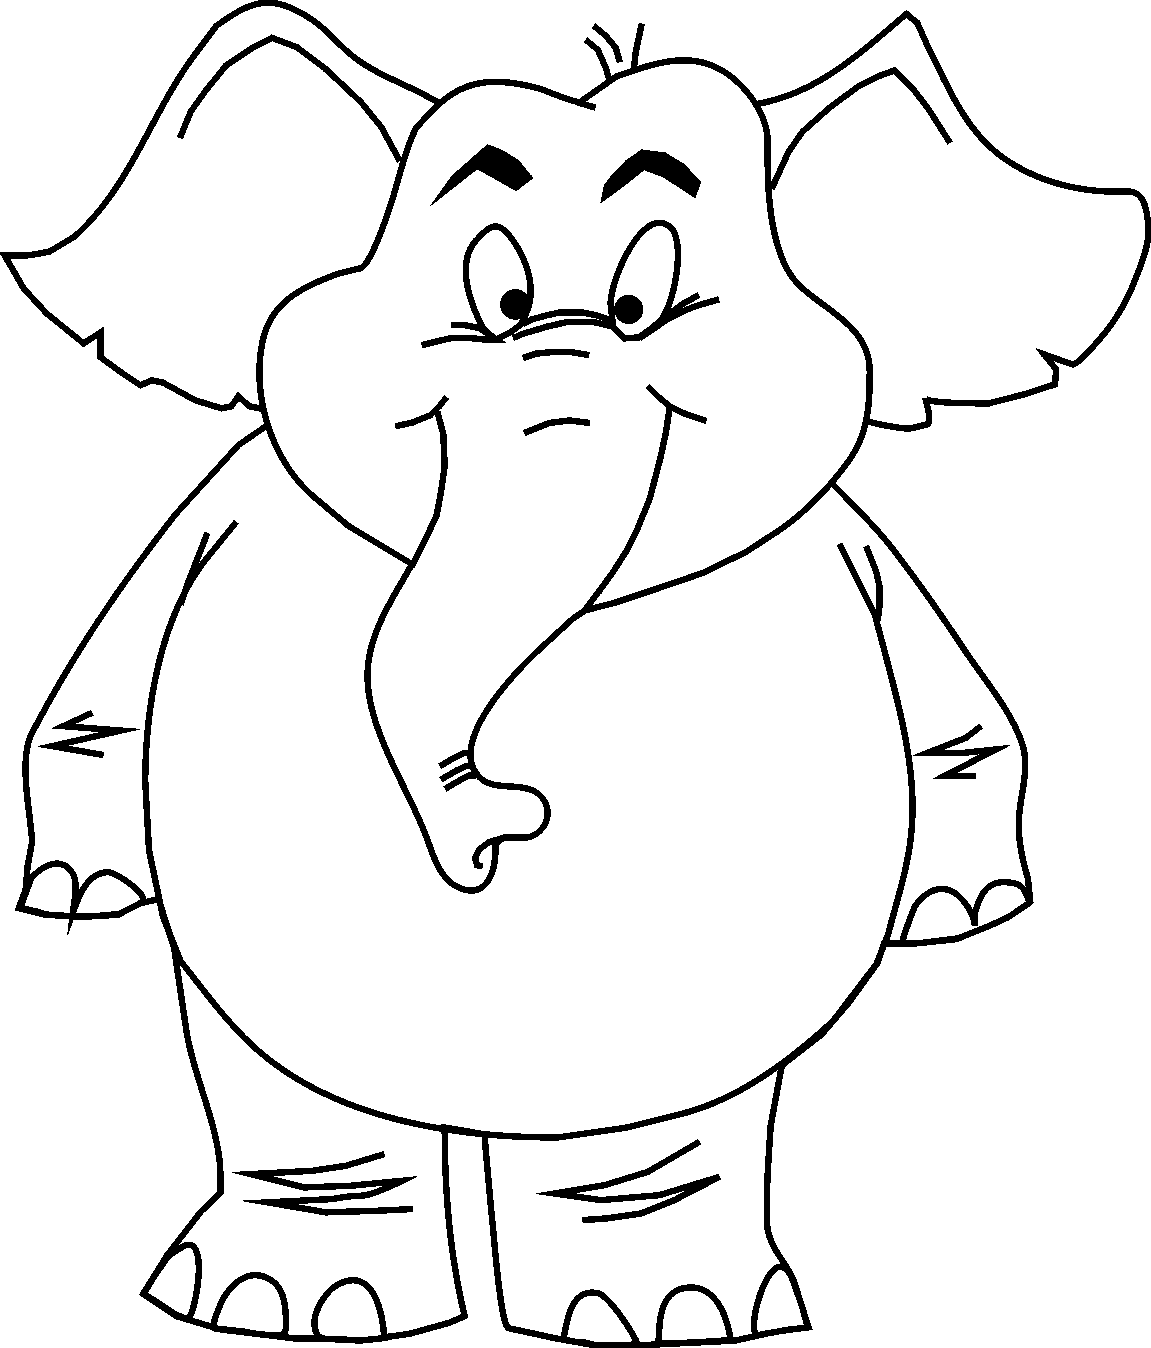 Cartoon Animals Coloring Pages Hd Widescreen 11 HD Wallpapers ...